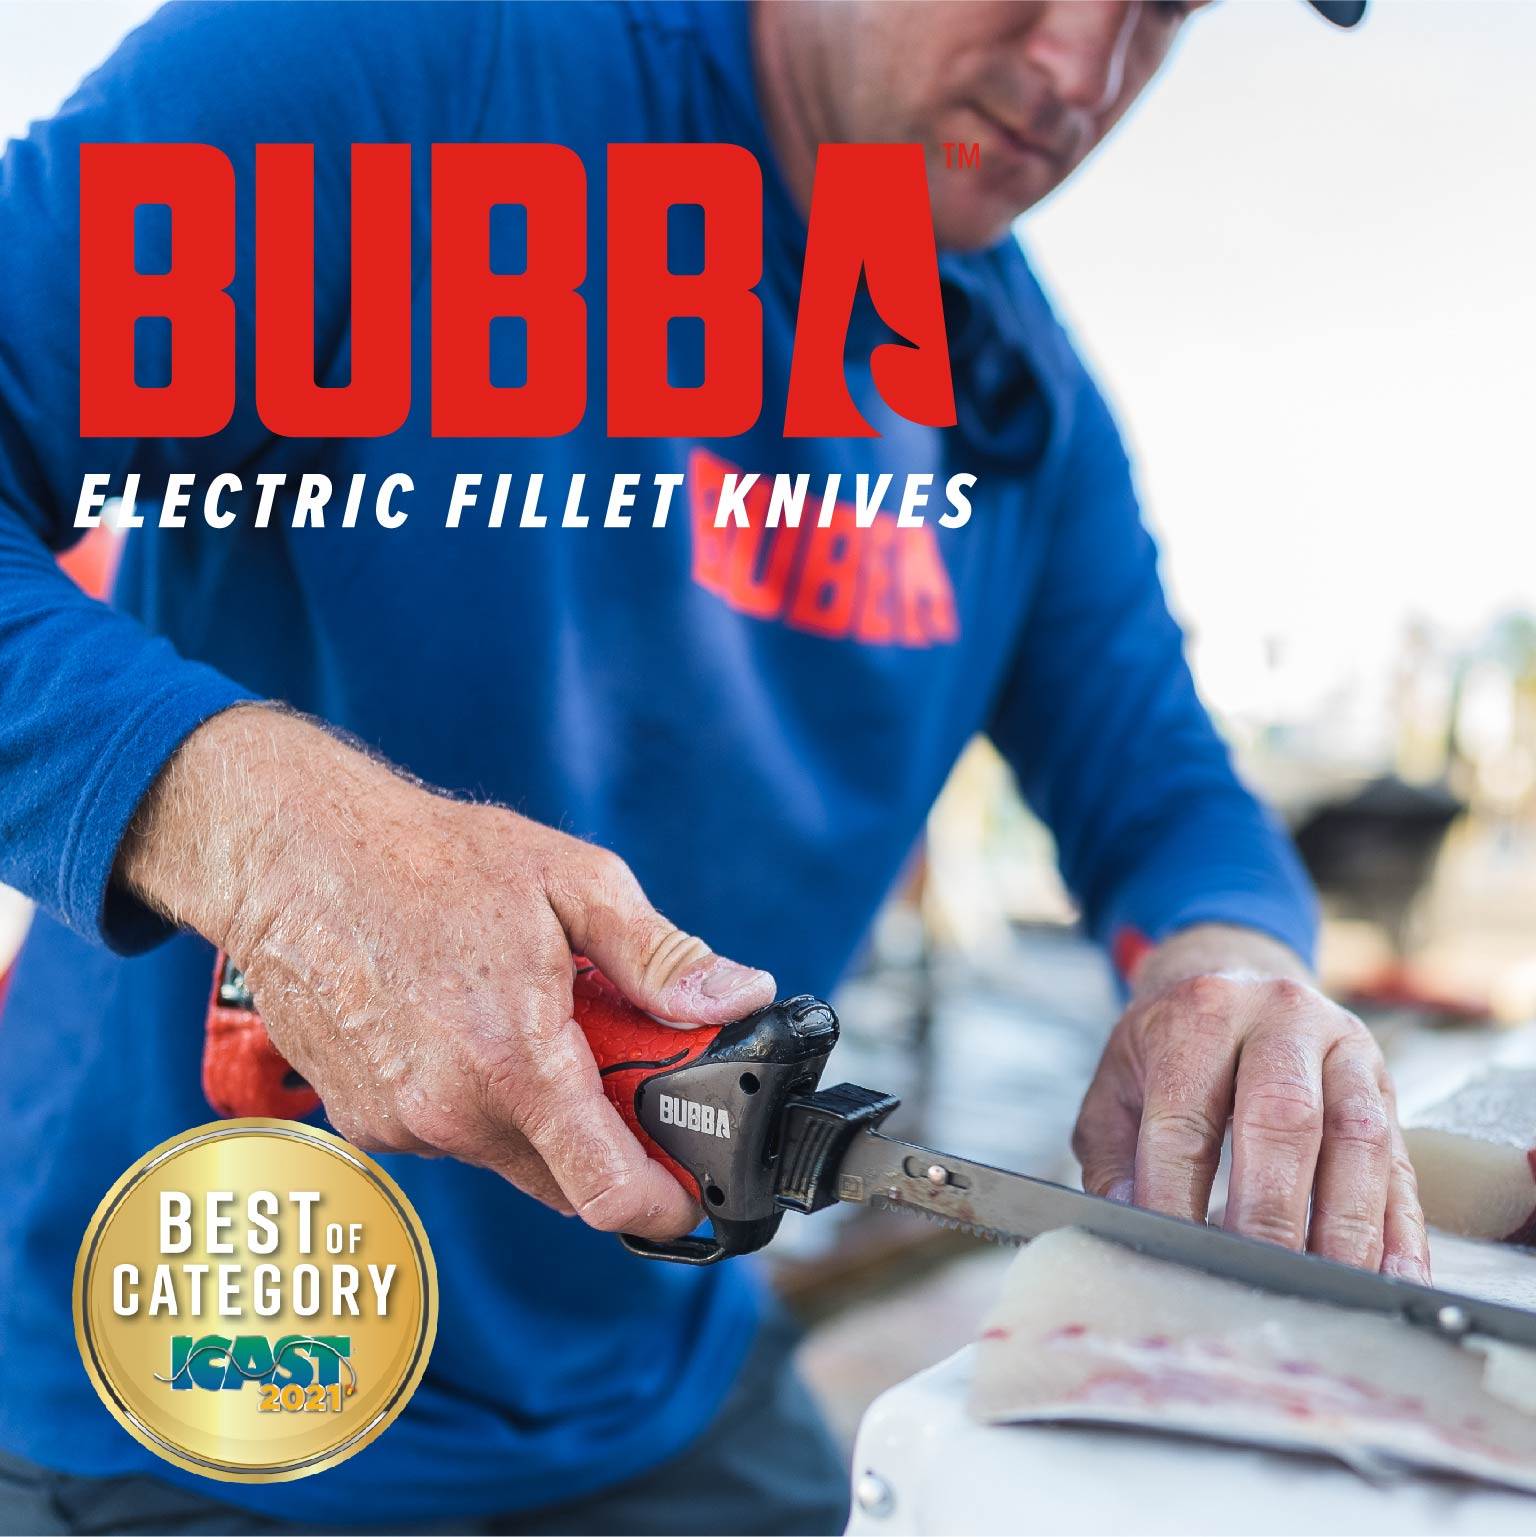 Bubba Blade Pro Series Cordless Electric Fillet Knife